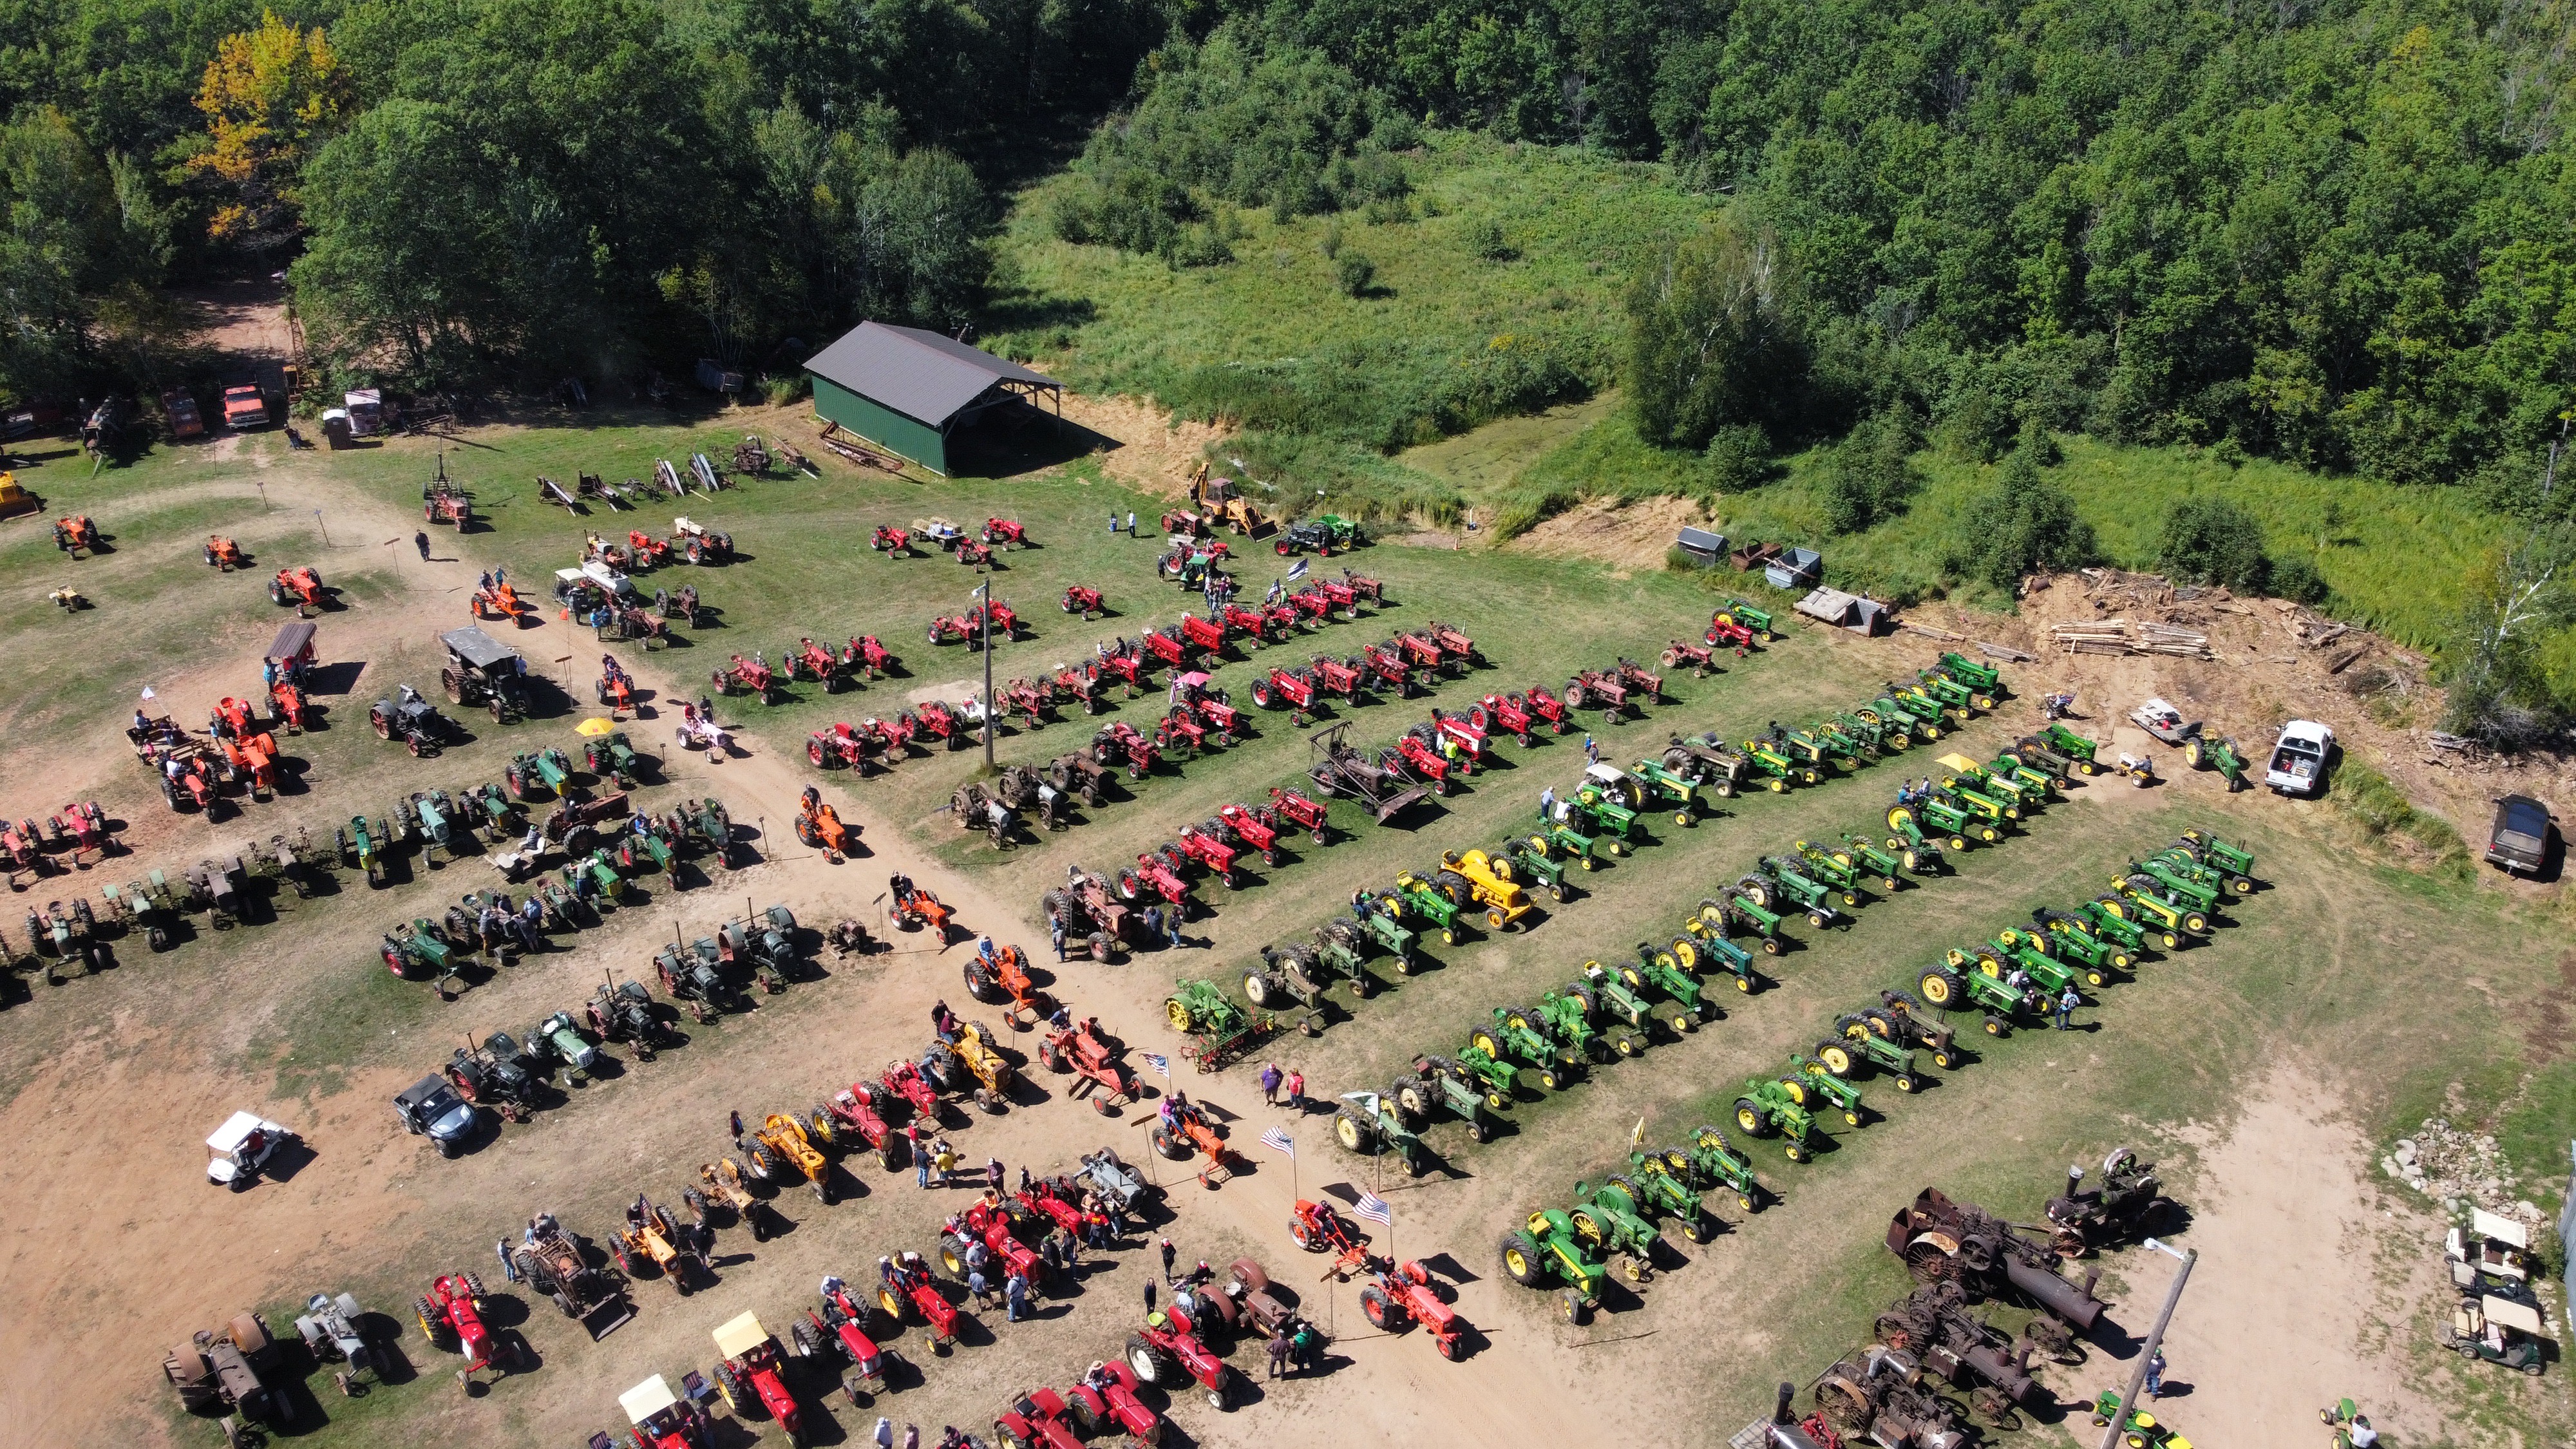 44th Annual White Pine Show. Labor Day Weekend 2022